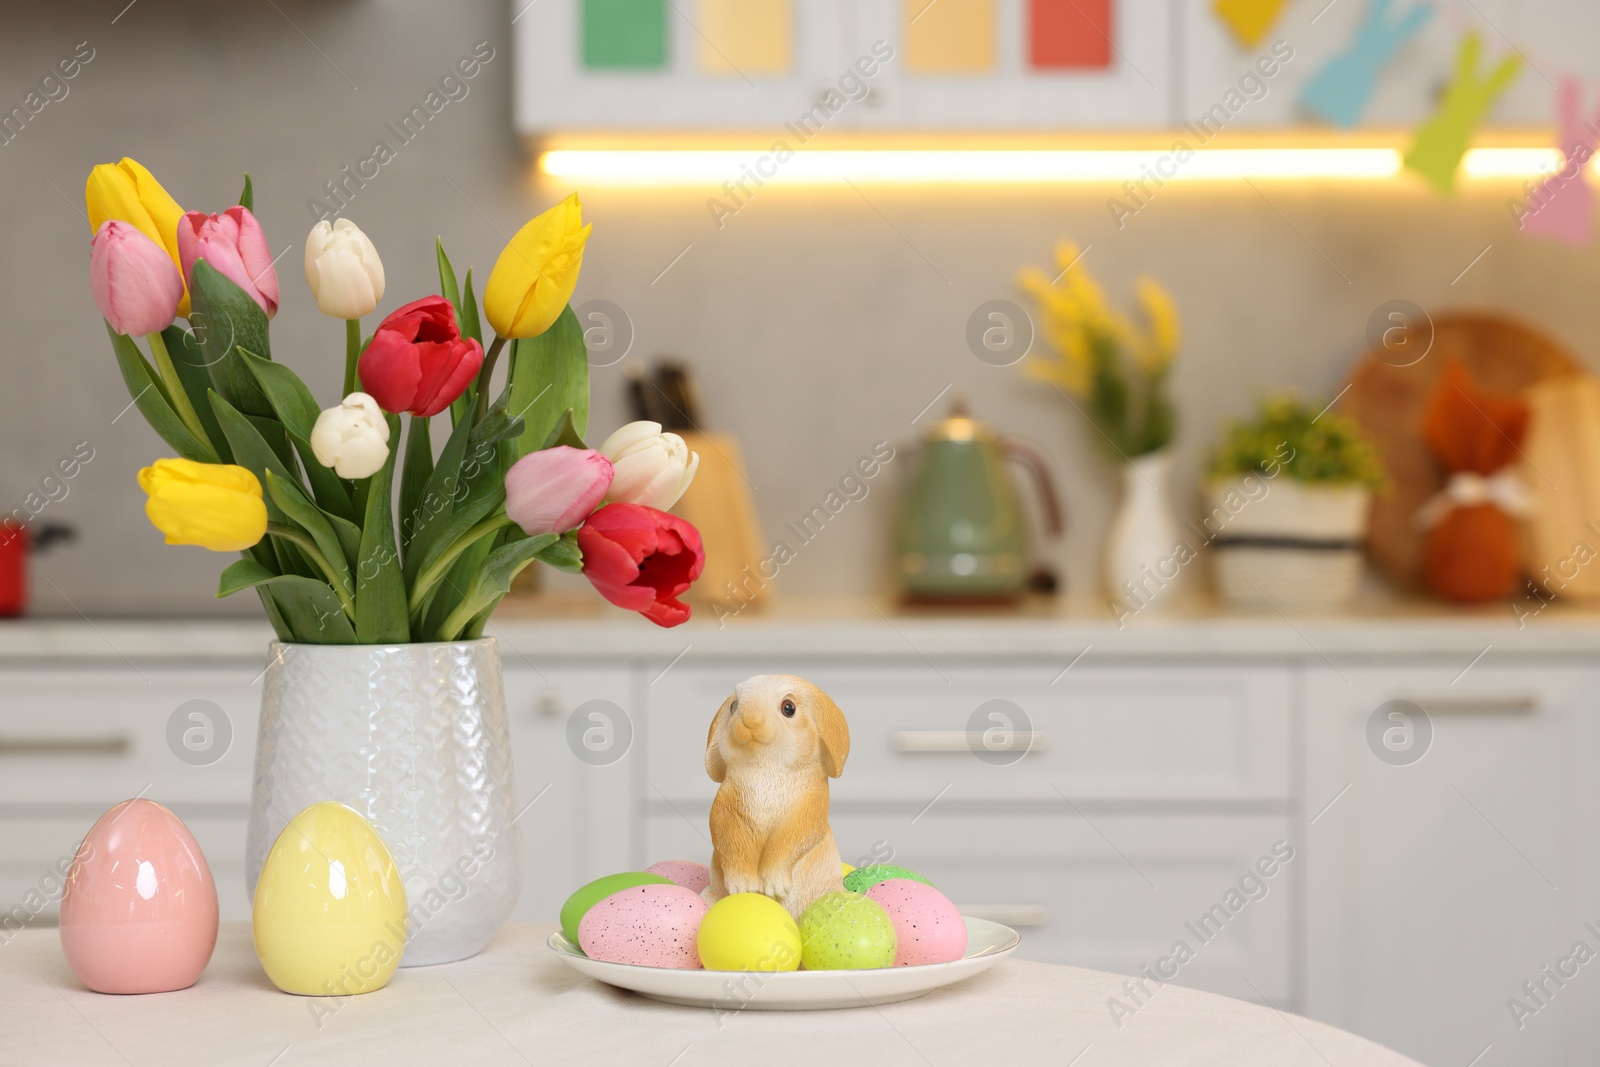 Photo of Bouquet of tulips, painted eggs and Easter decorations on white table in kitchen. Space for text